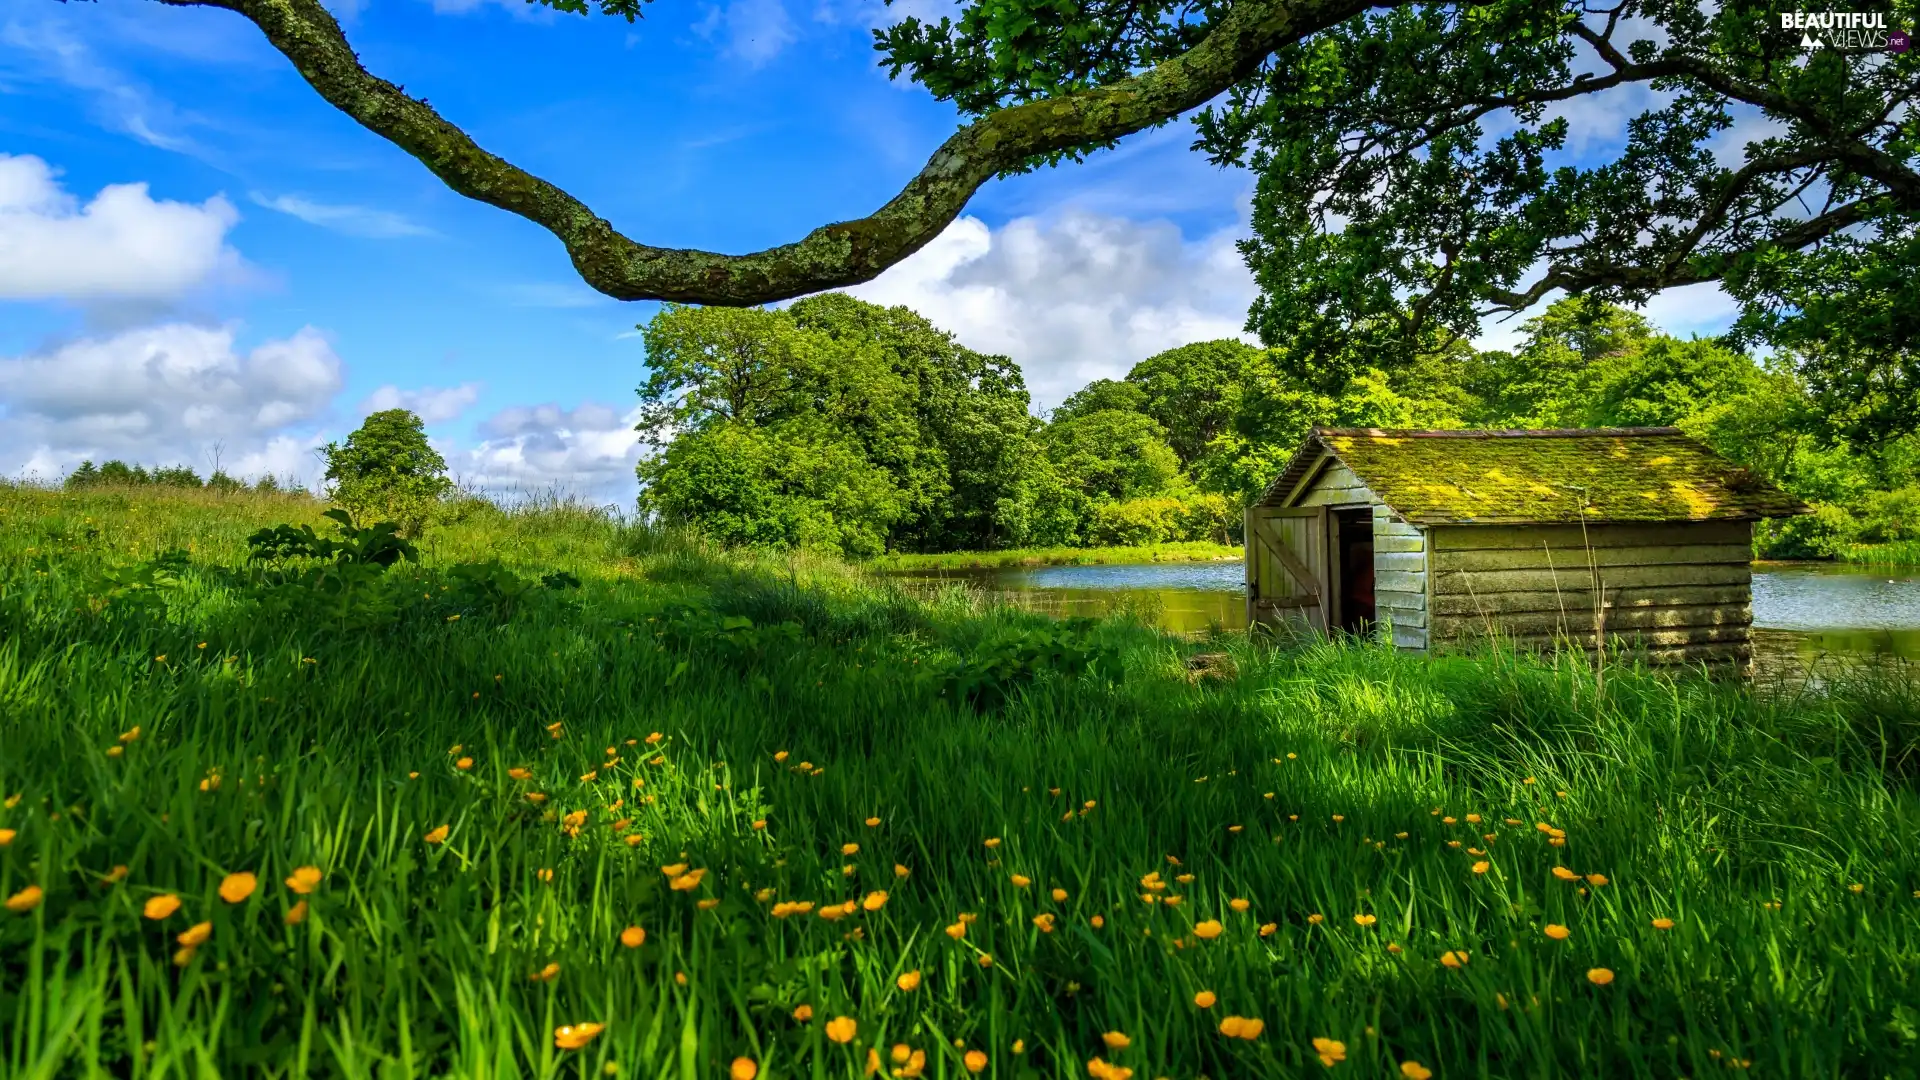 Meadow, Home, trees, lake, wooden, Flowers, viewes